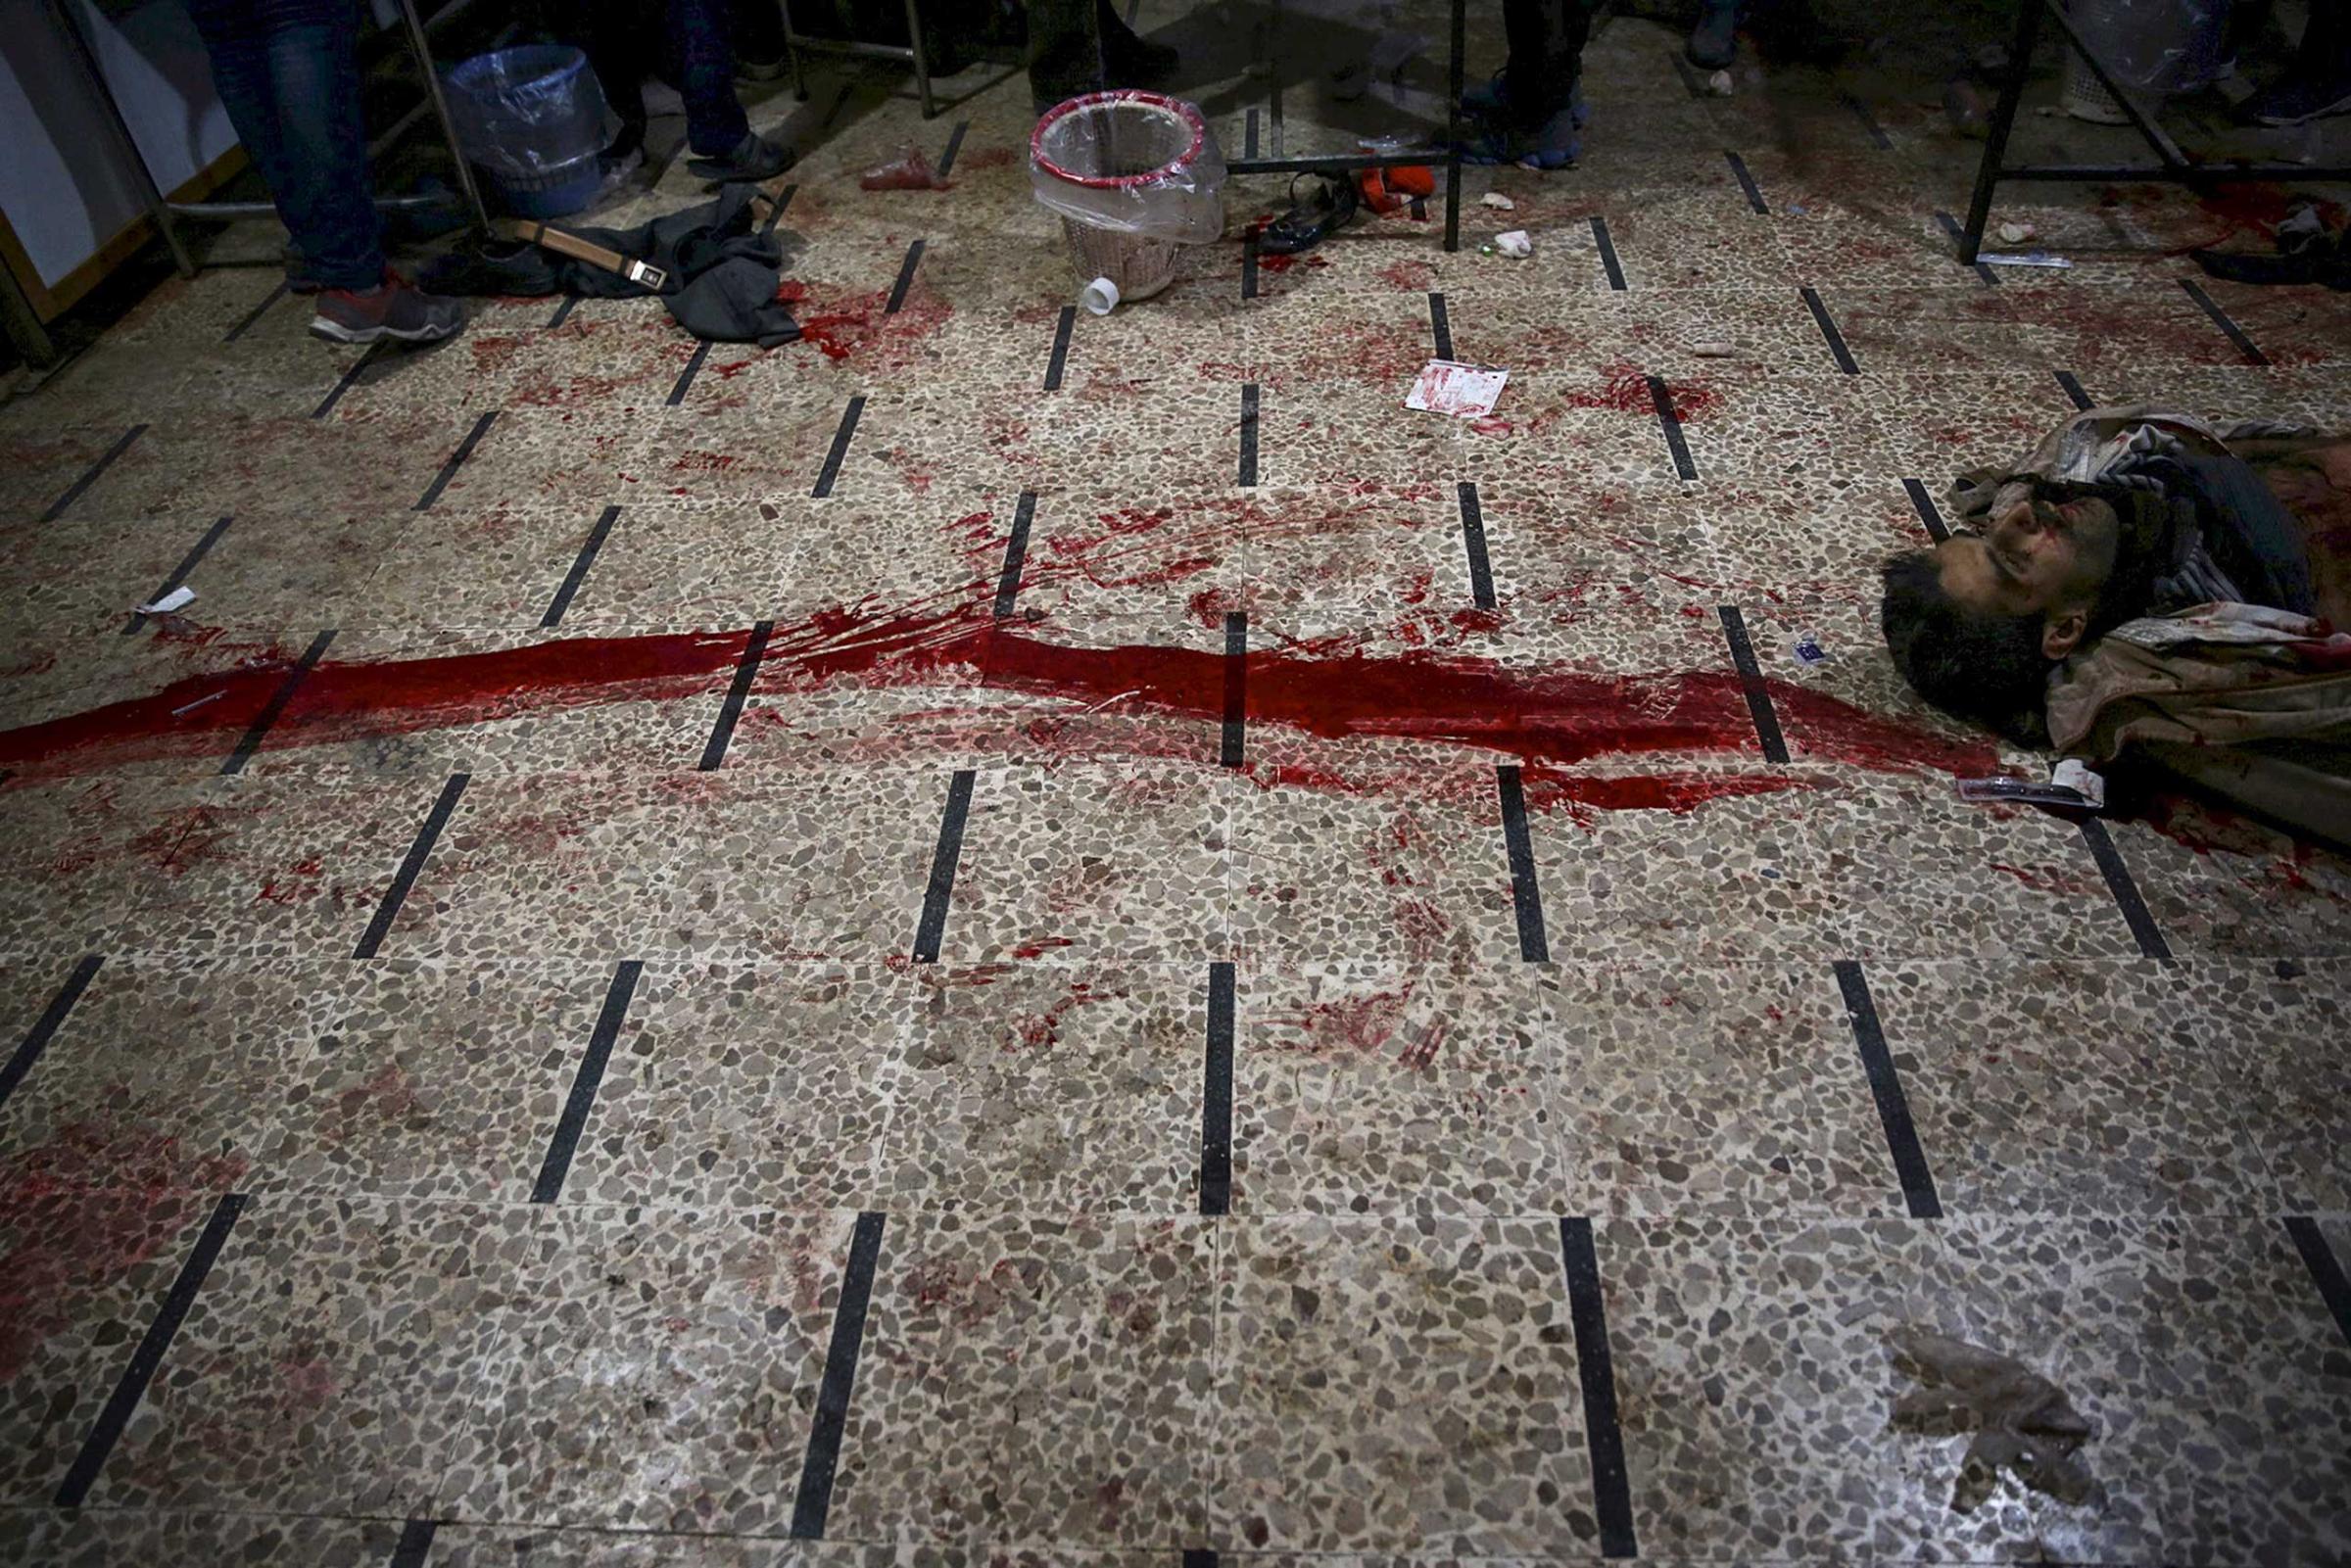 The body of a dead man is seen next to blood stains at a field hospital, after what activists said were air and missile strikes, in the Douma neighborhood of Damascus, Syria, Dec. 13, 2015.